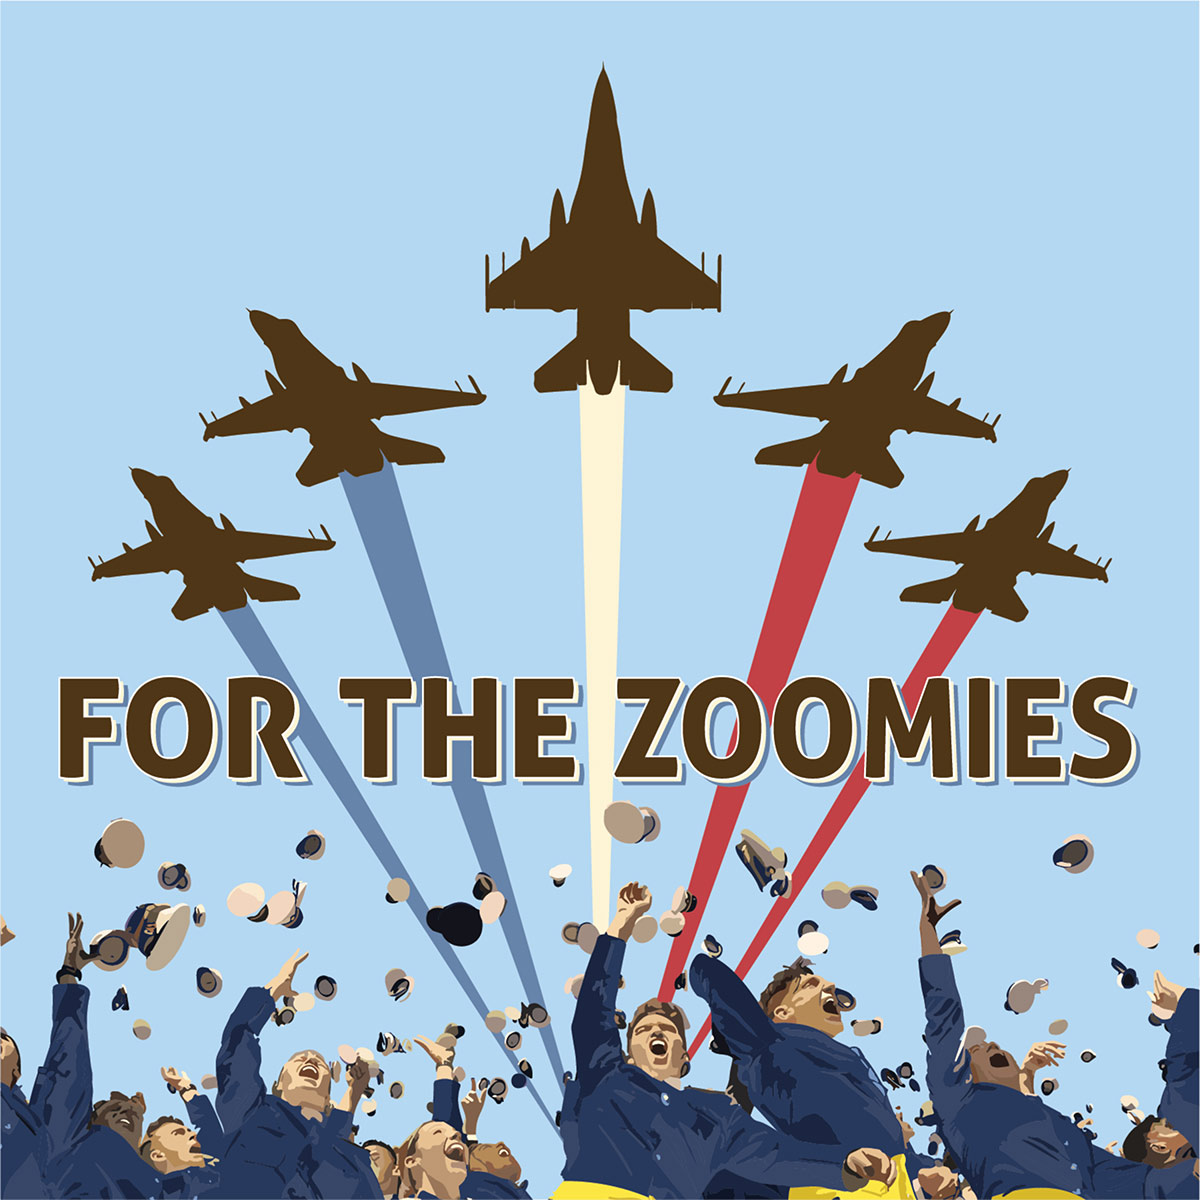 John Doolittle’s conversation with Andrew Cormier on “For the Zoomies” Podcast